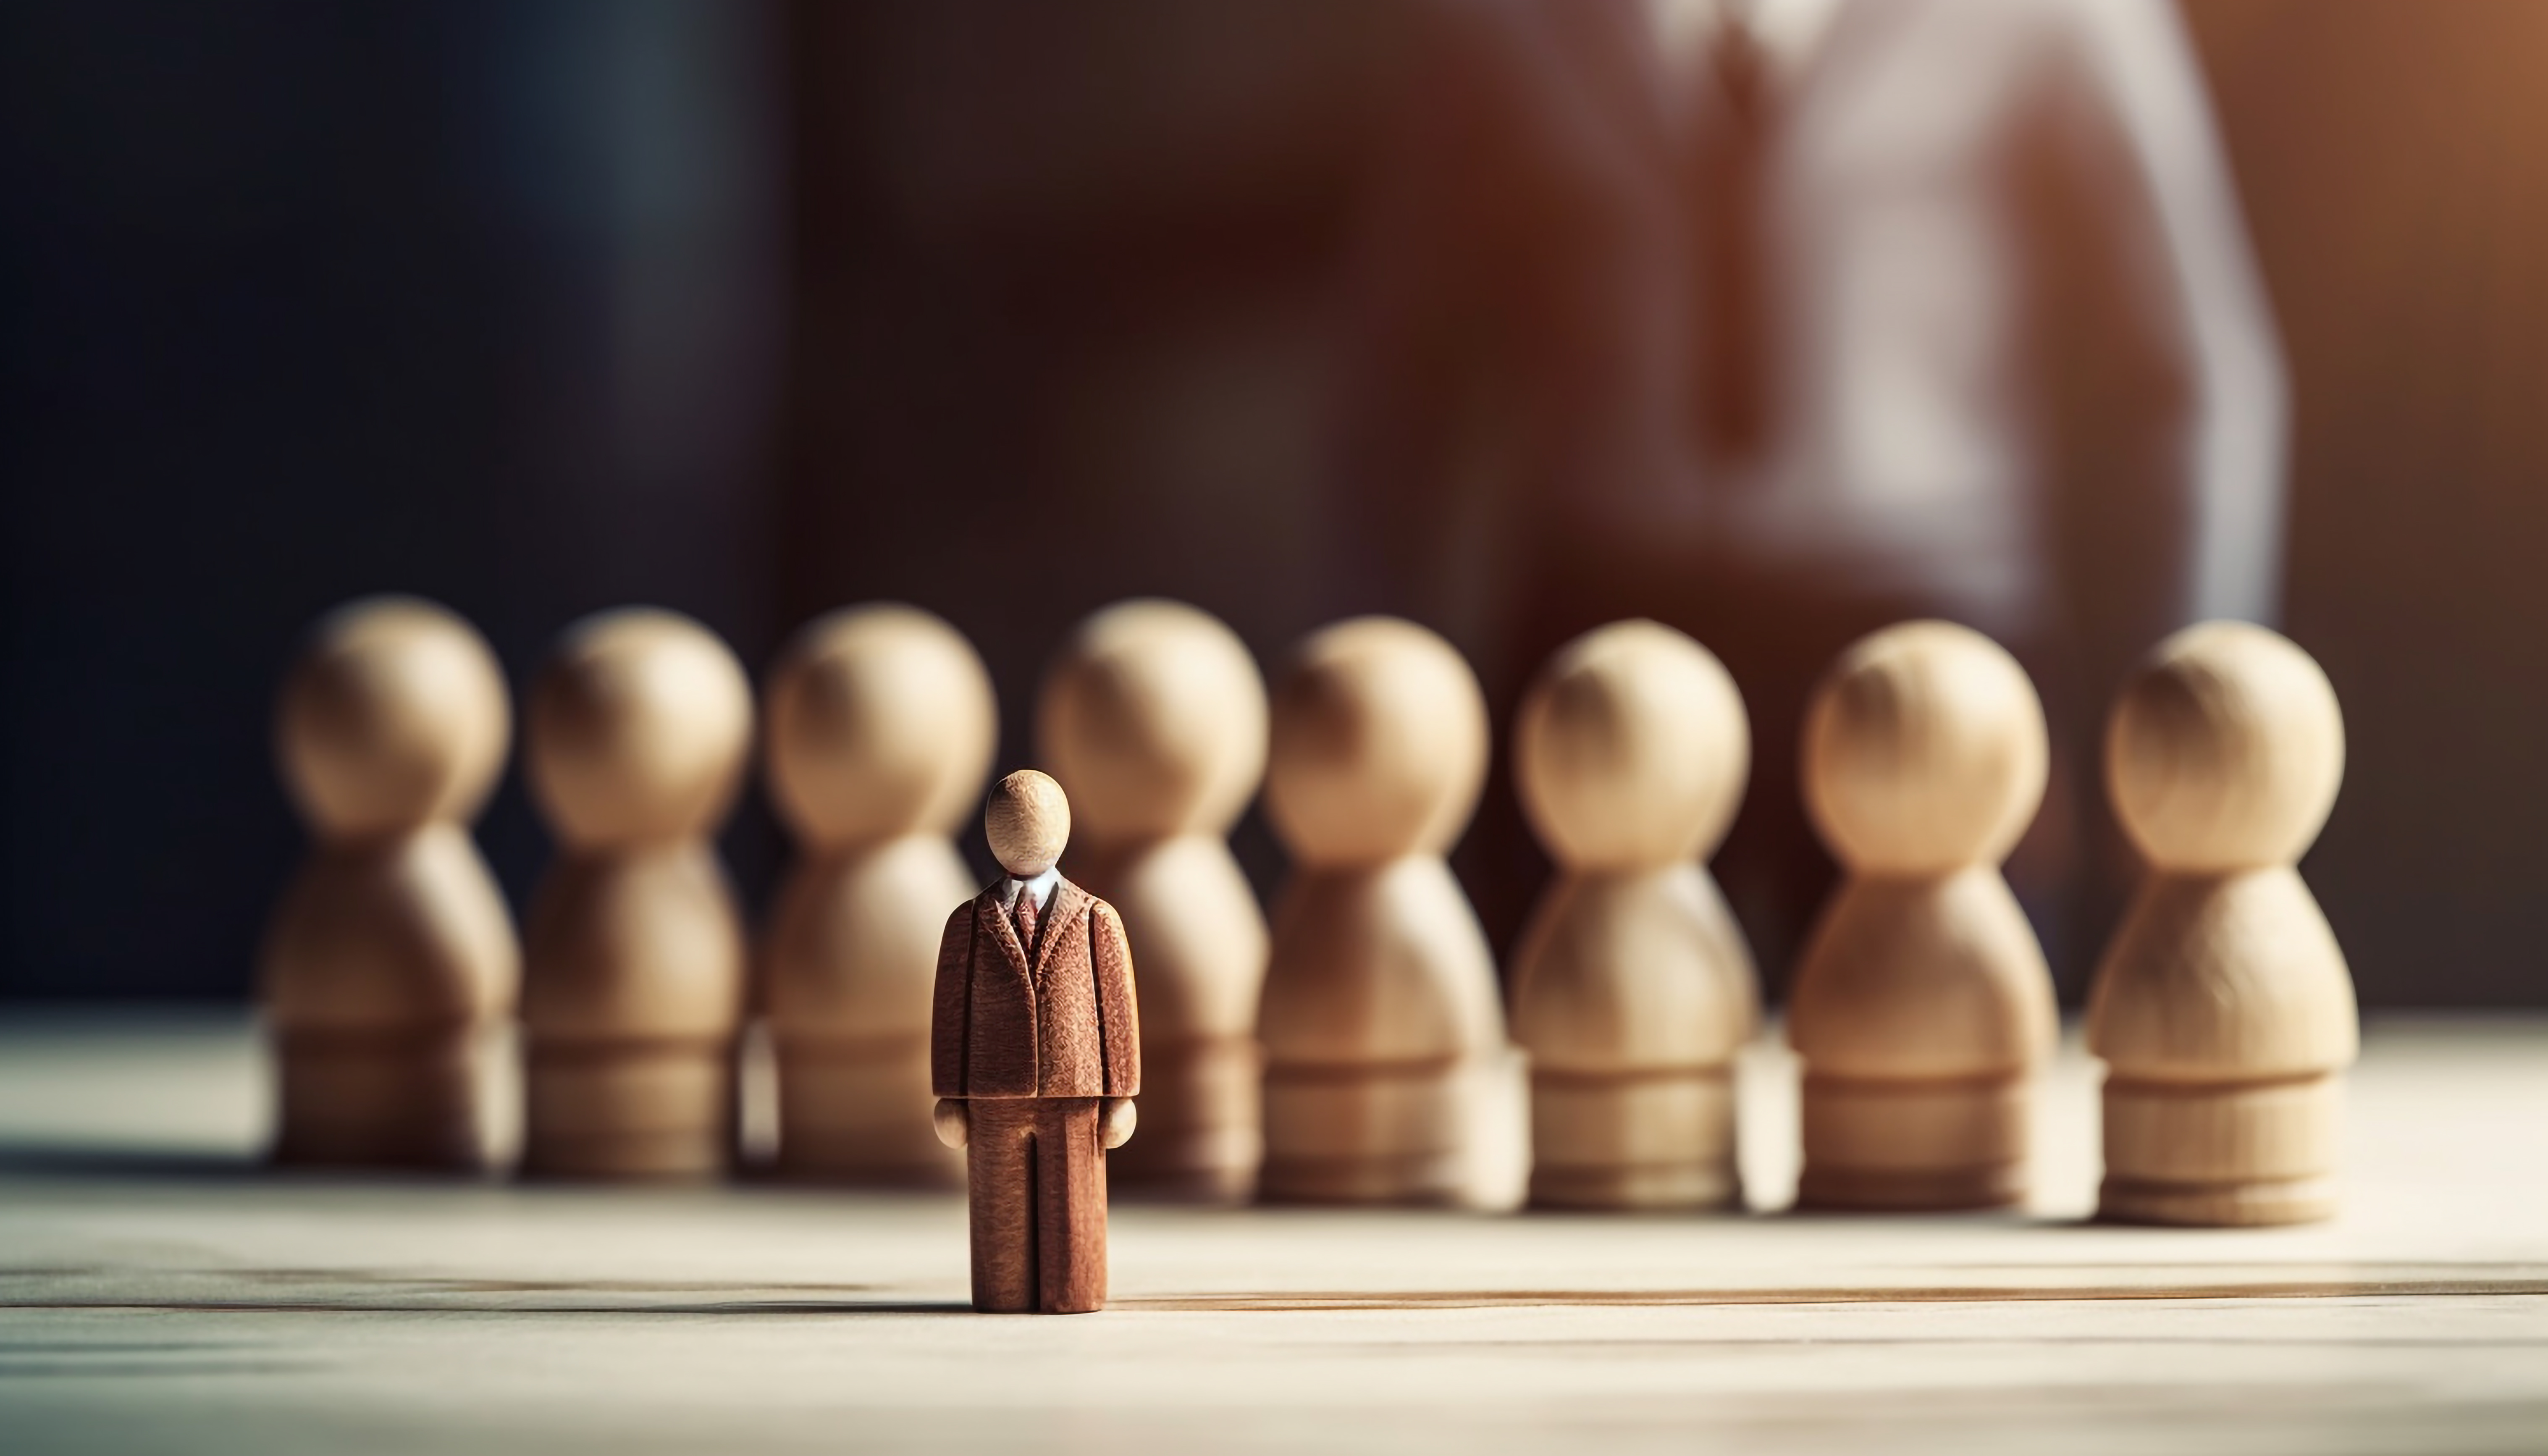 Chess pieces aligned in strategic business moves generated by AI